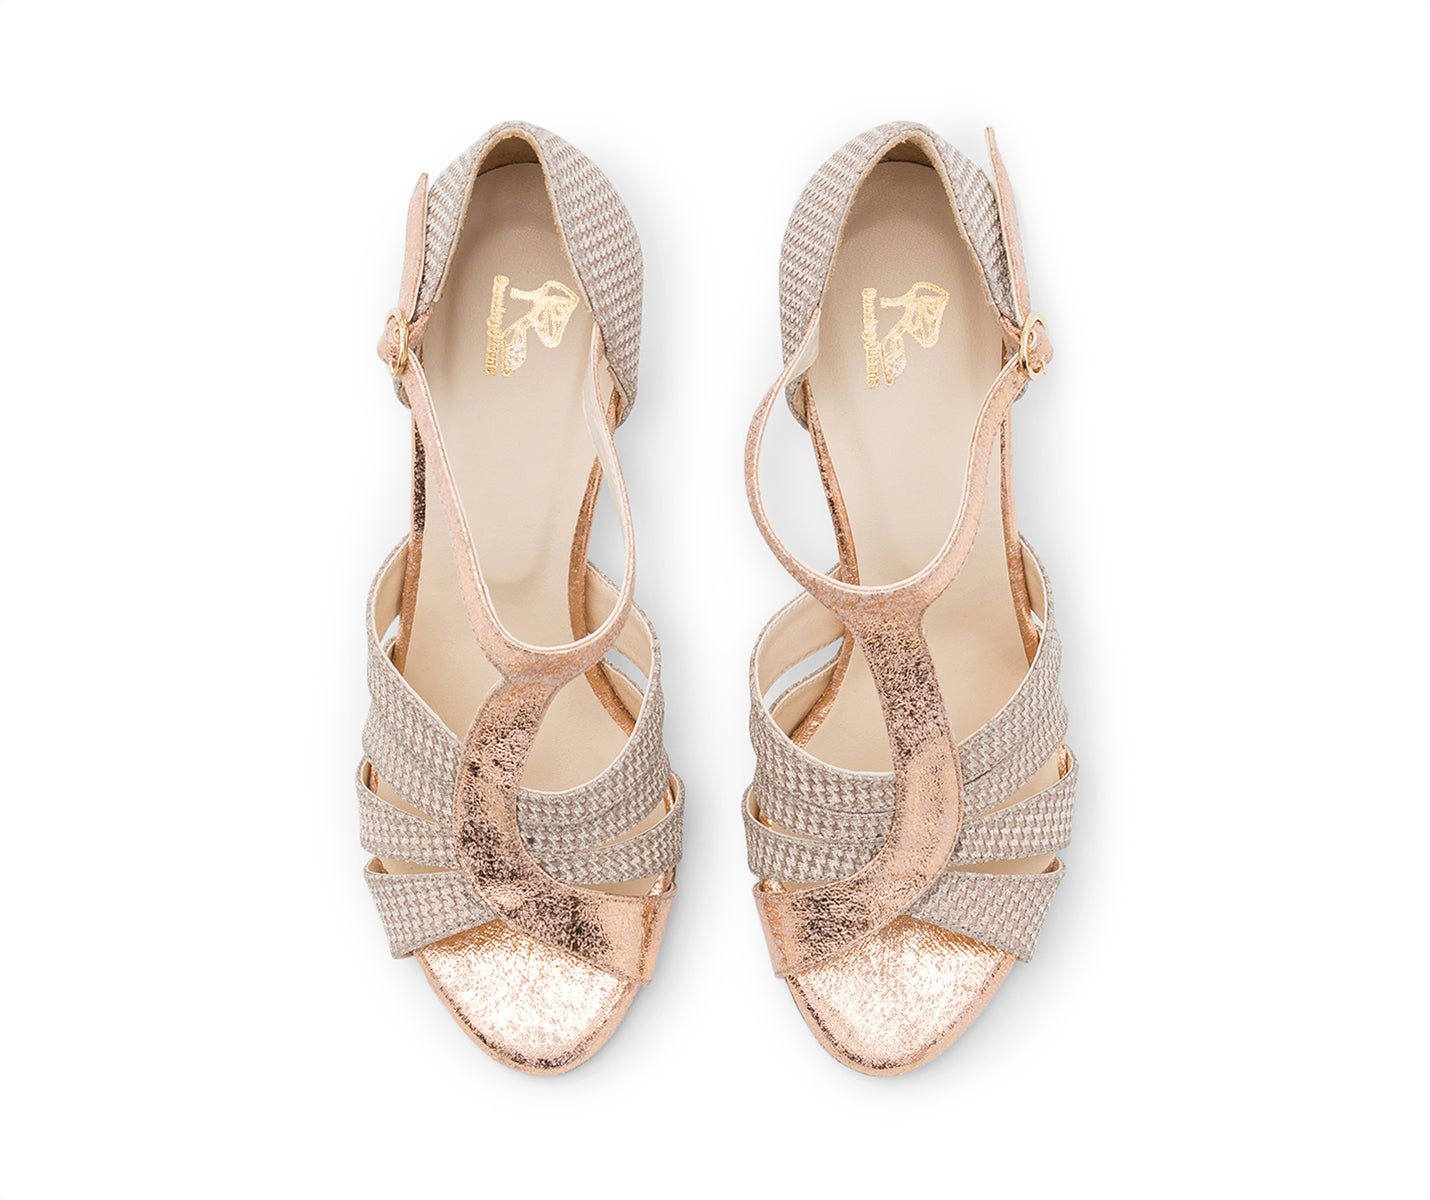 ESP09 dance shoes in rose gold